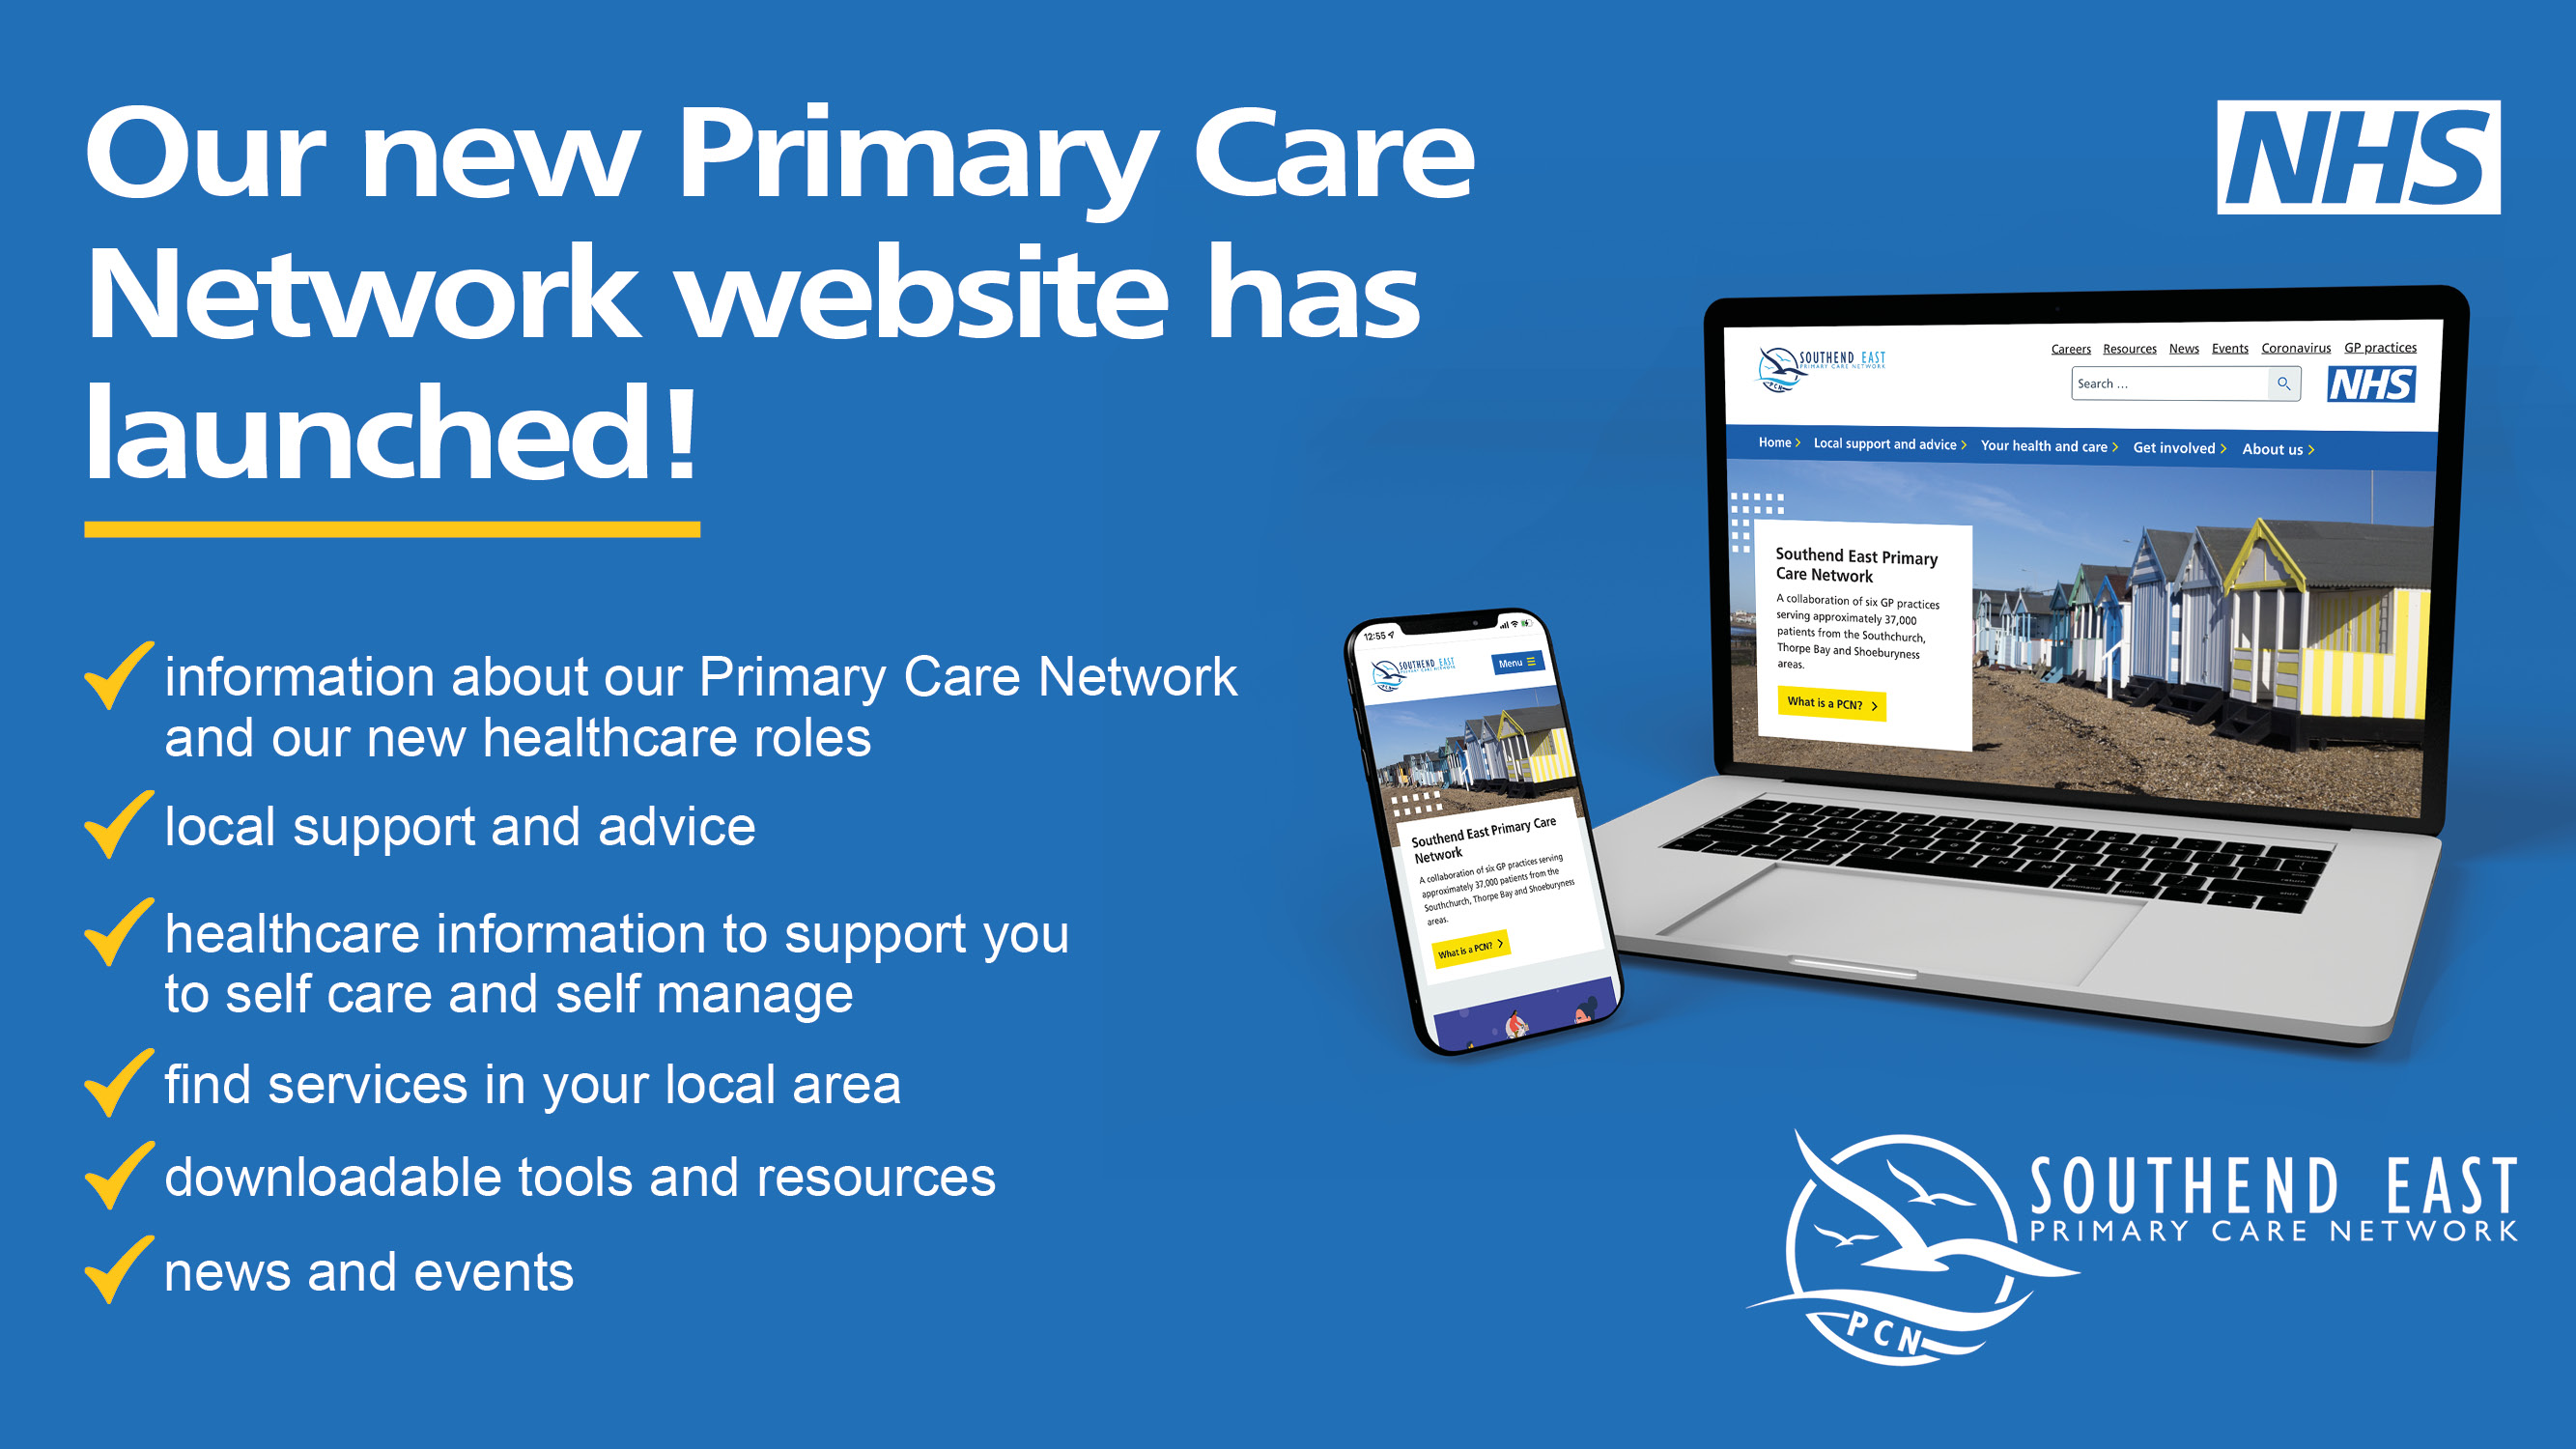 Our new primary care network website has launched!